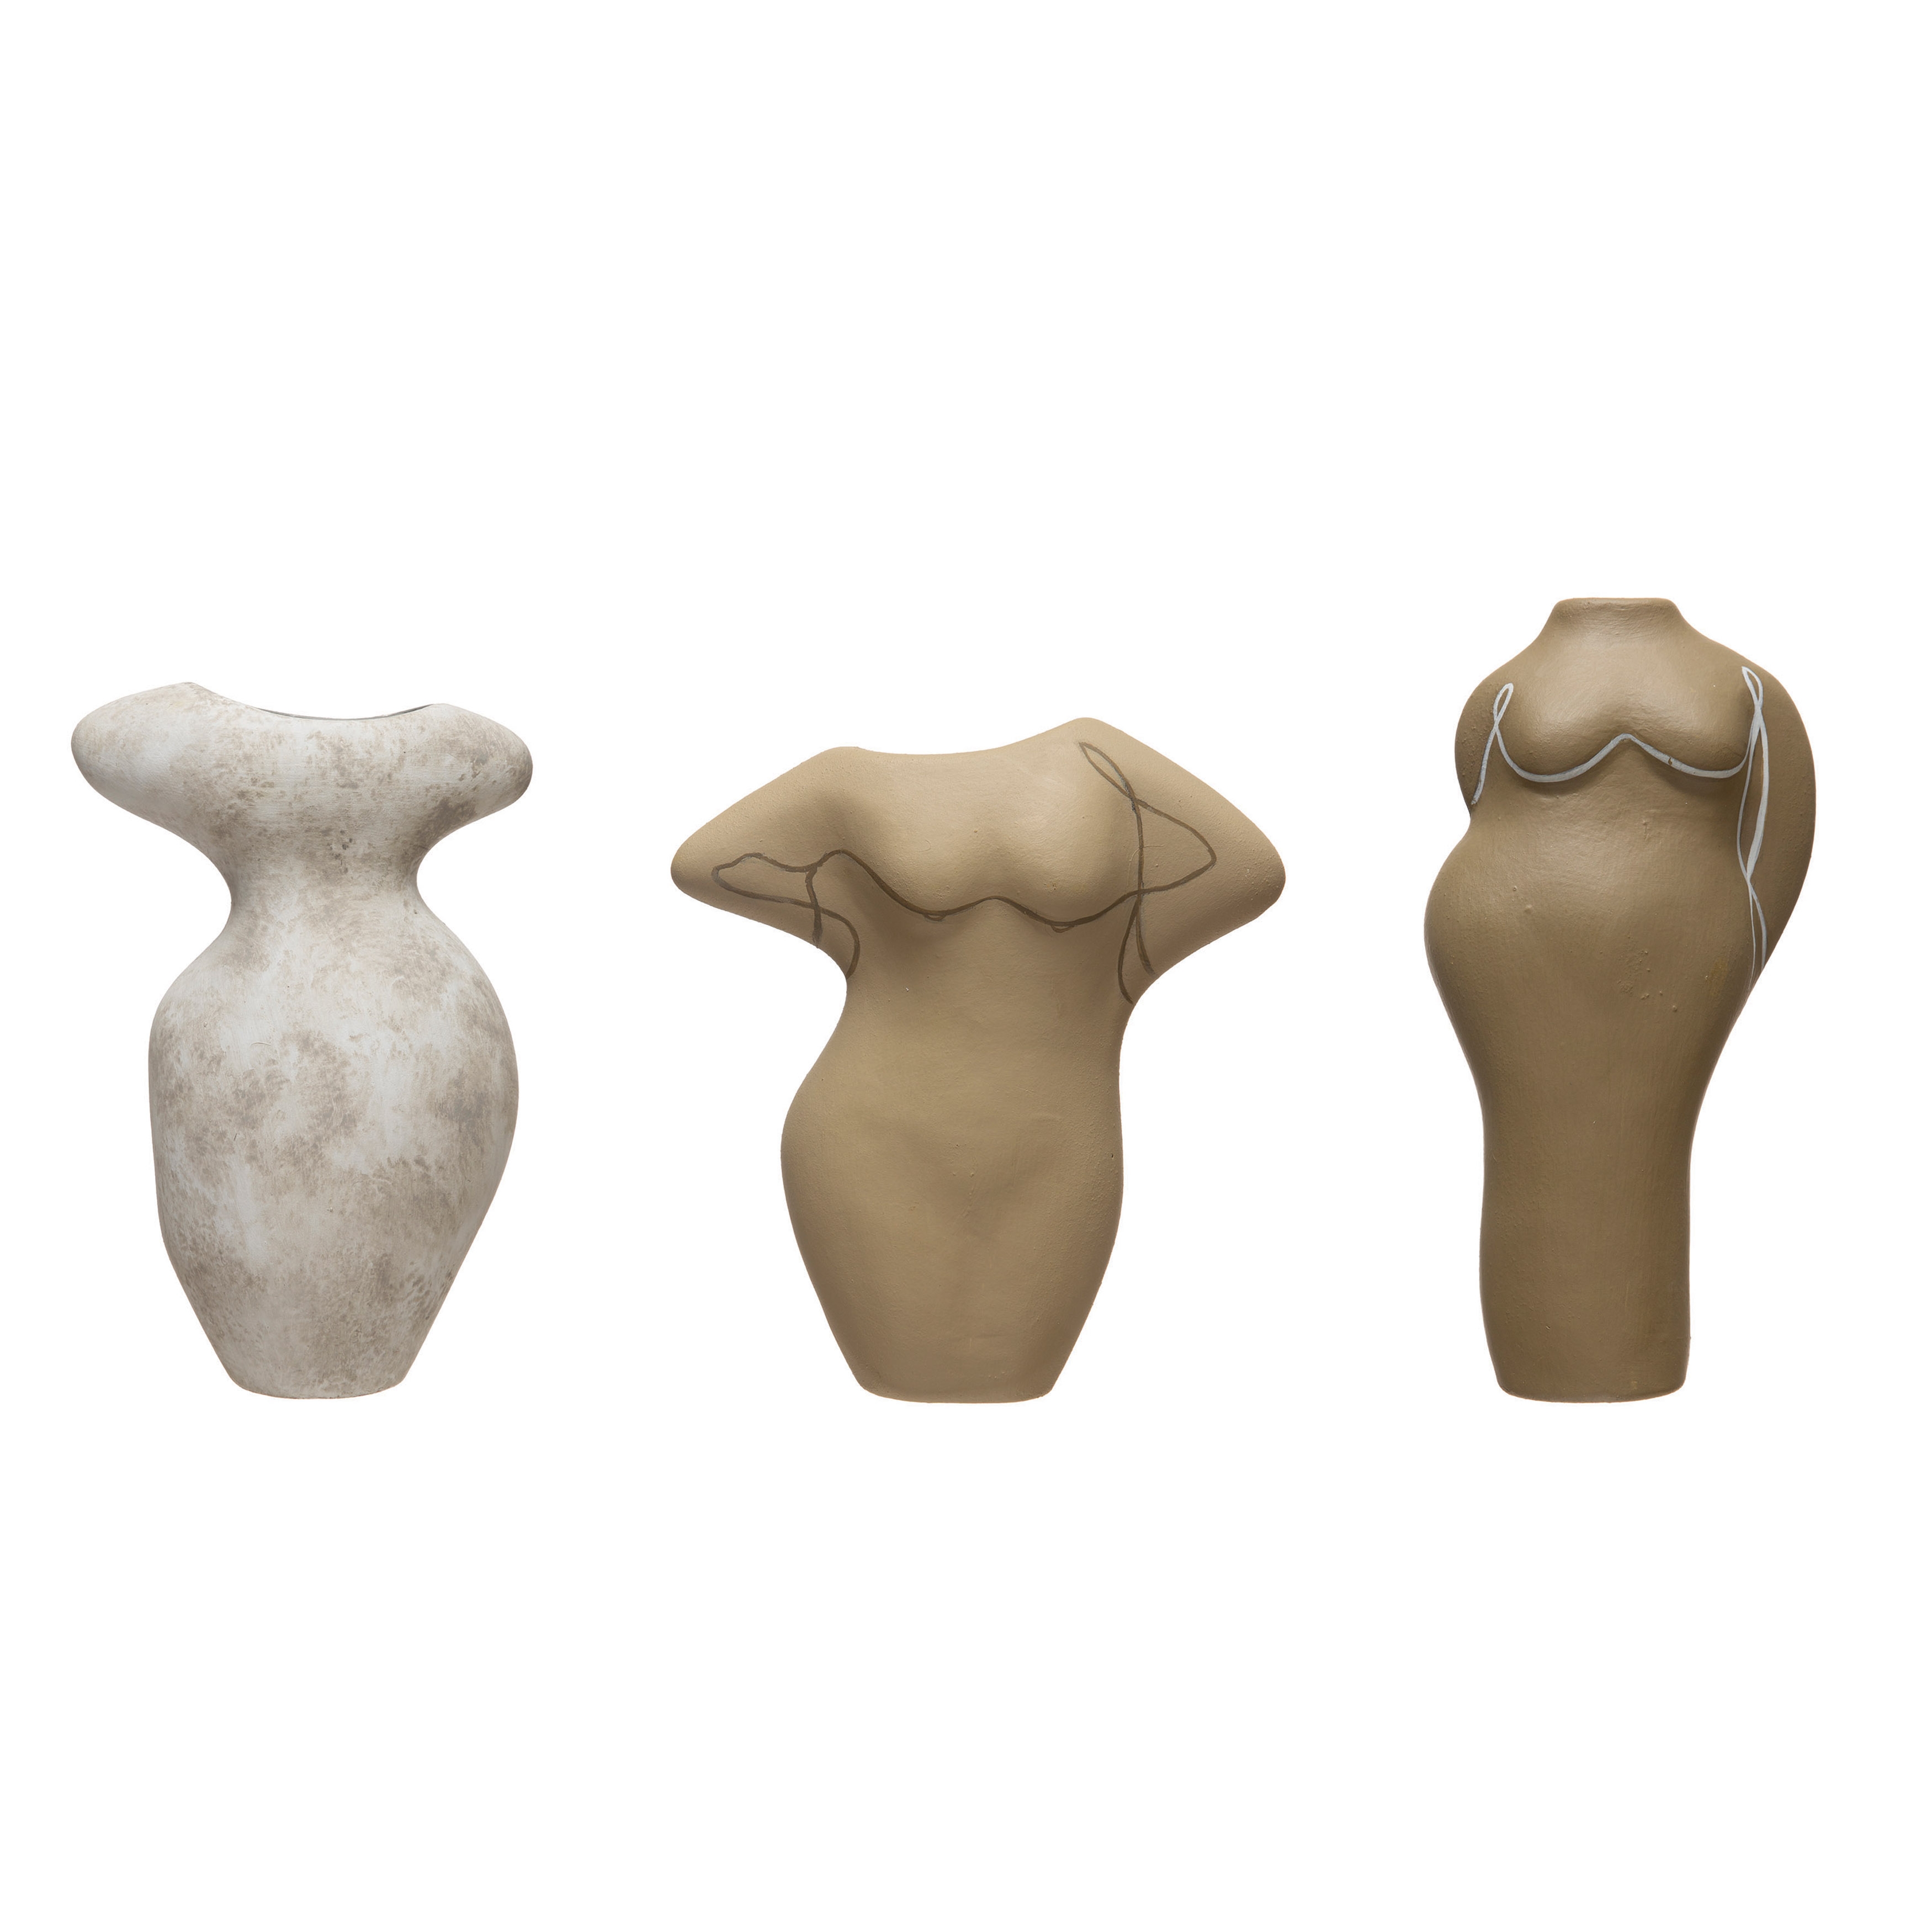 Terracotta Figurine Vases Shaped as a Body, Set of 3 - Image 0